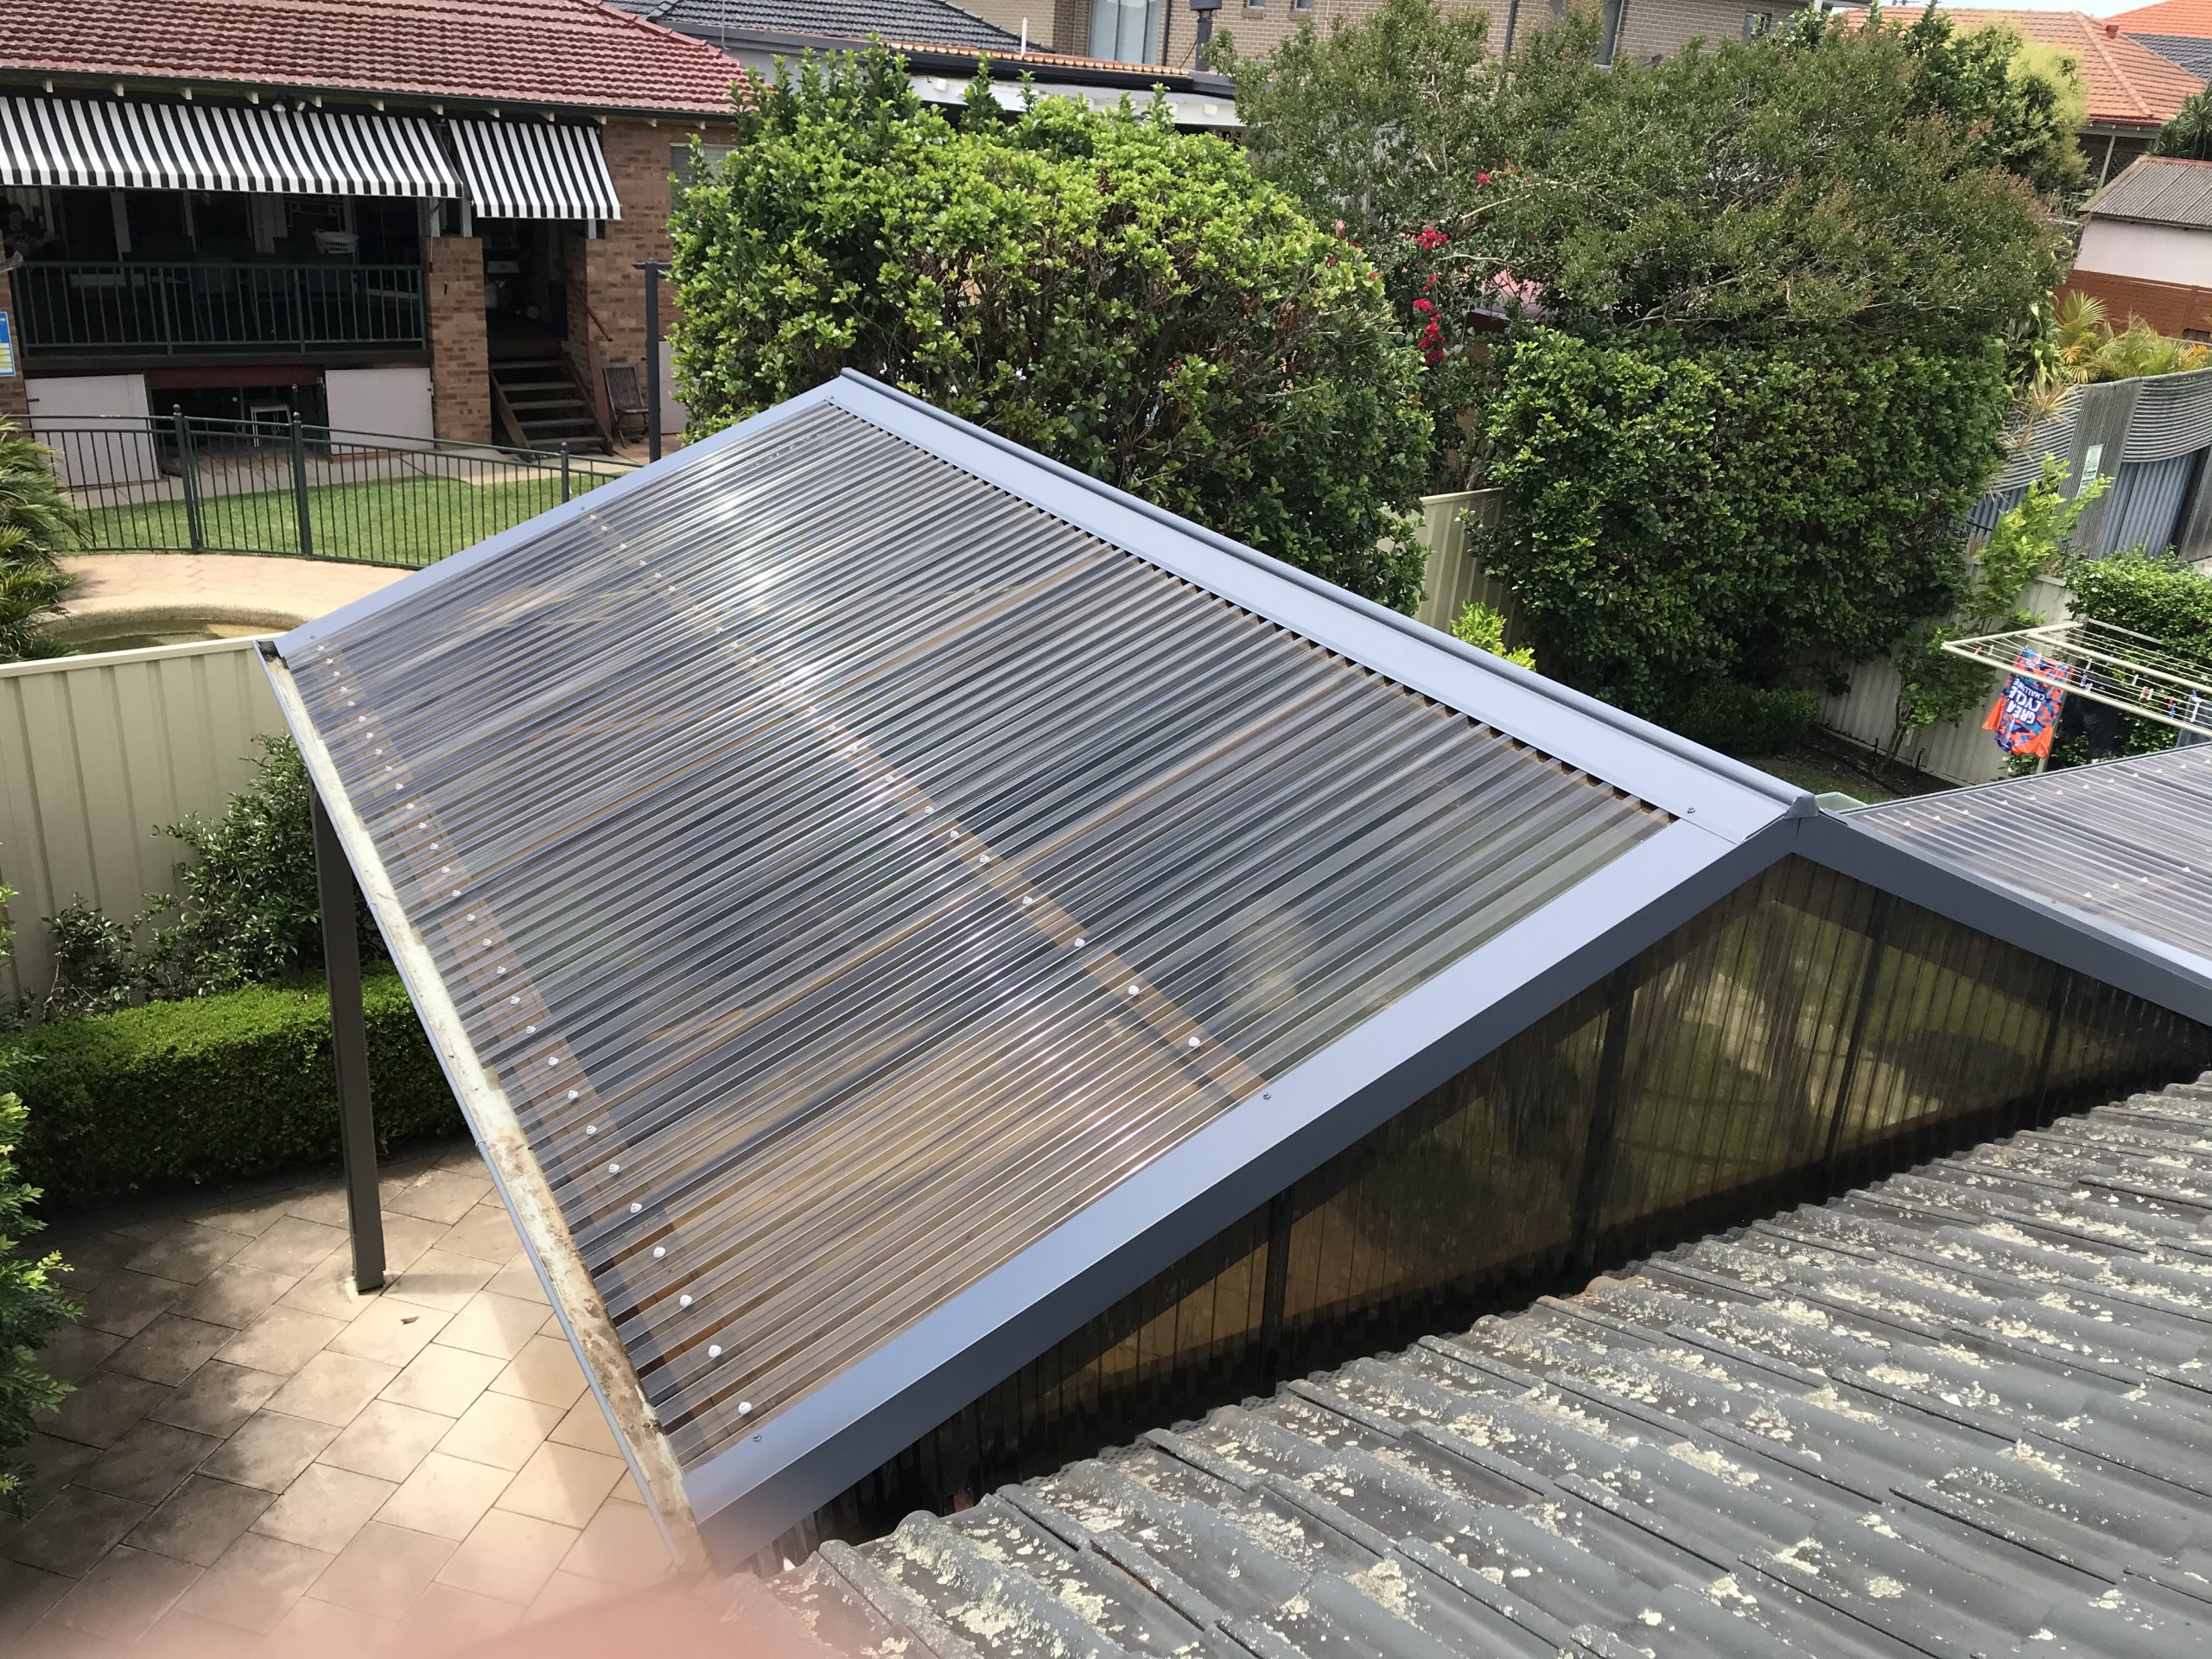 Polycarbonate roof and flashings